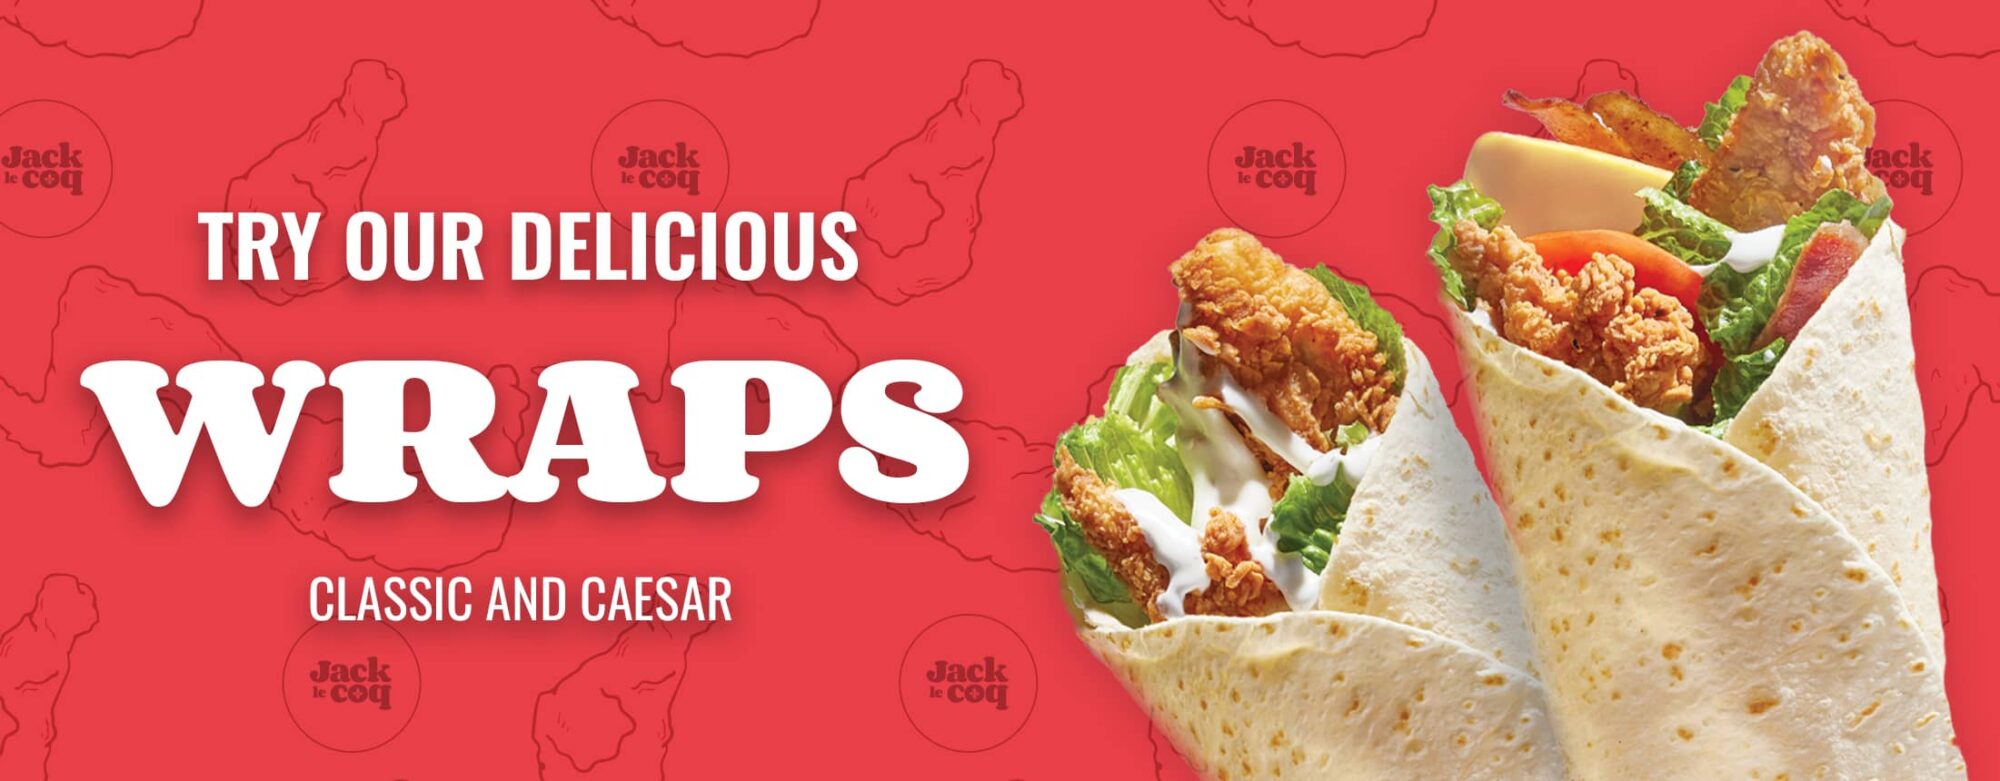 Two classic and Caesar Jack le coq wraps with red background